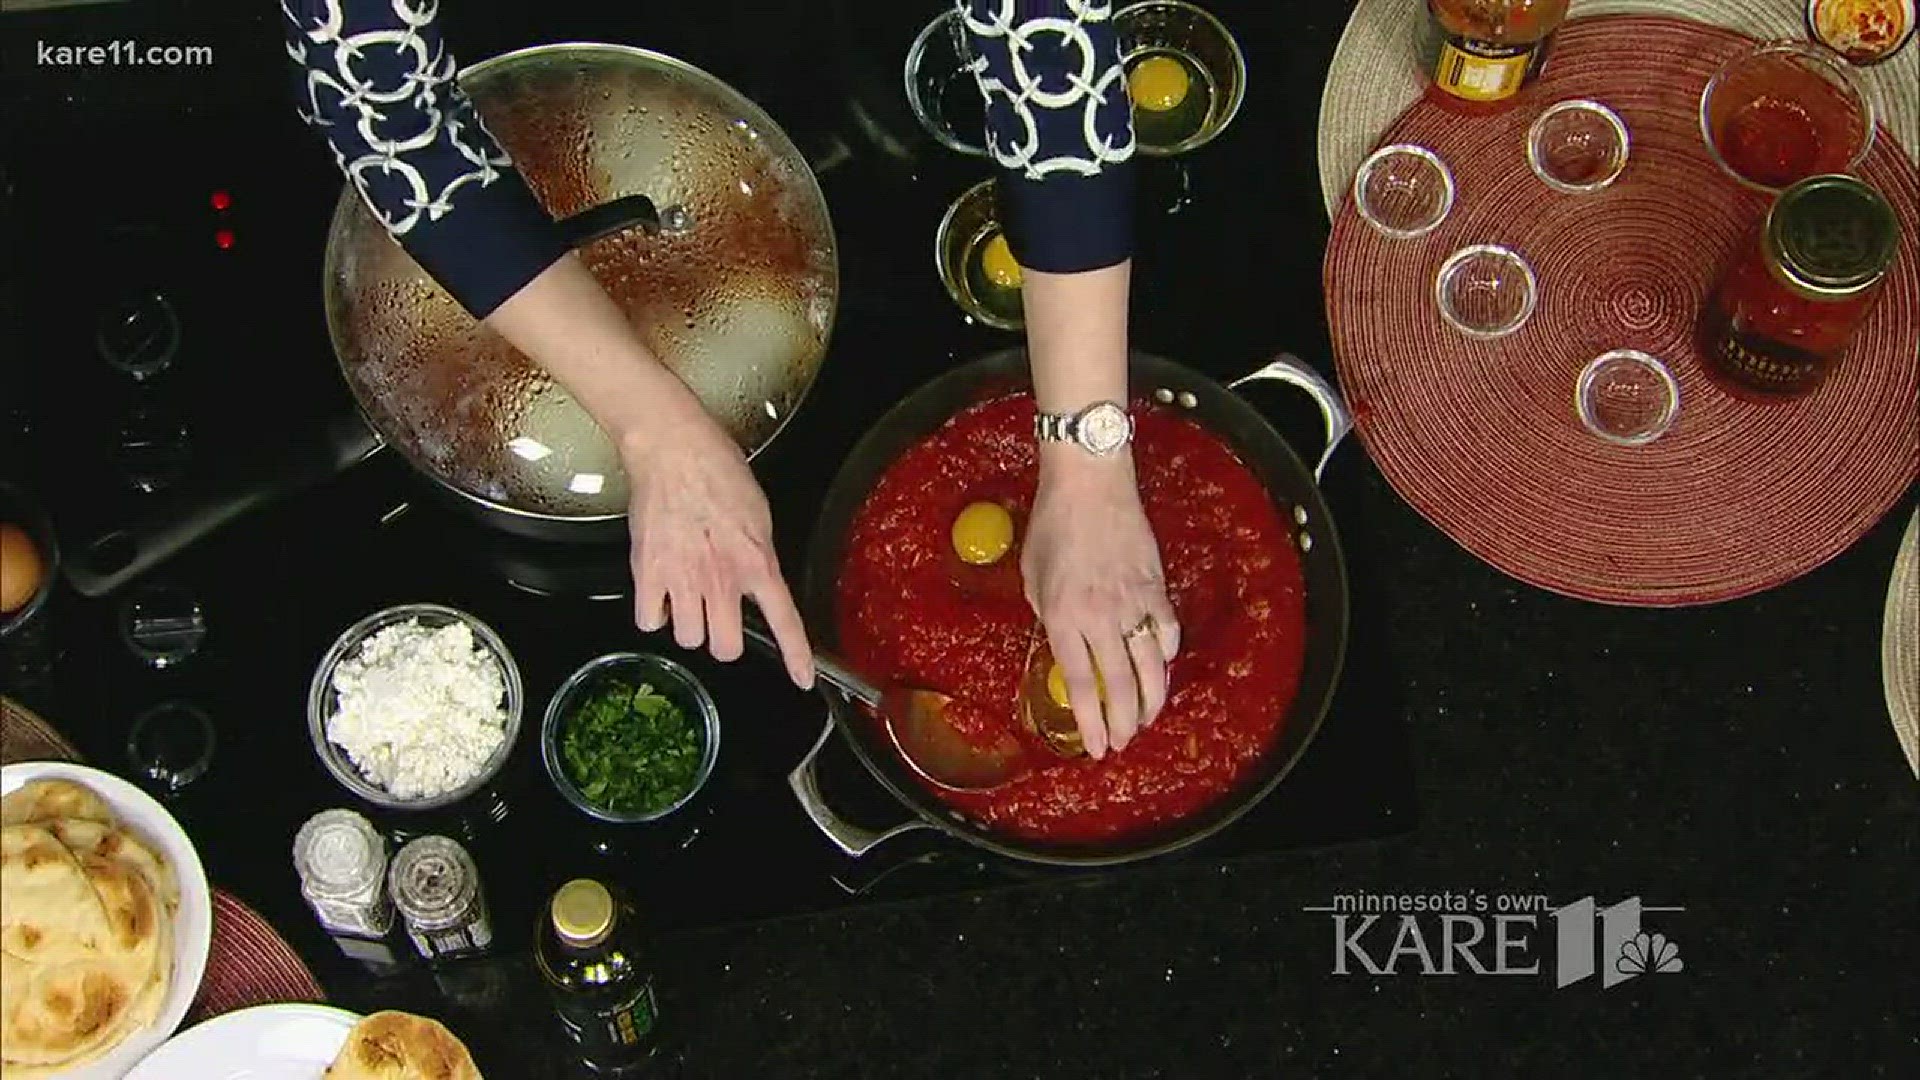 Rachel Perron explains the many ways that Moroccan dishes are created through spices and various ingredients, and shows us how to make the dish and the sauce called shakshuka.